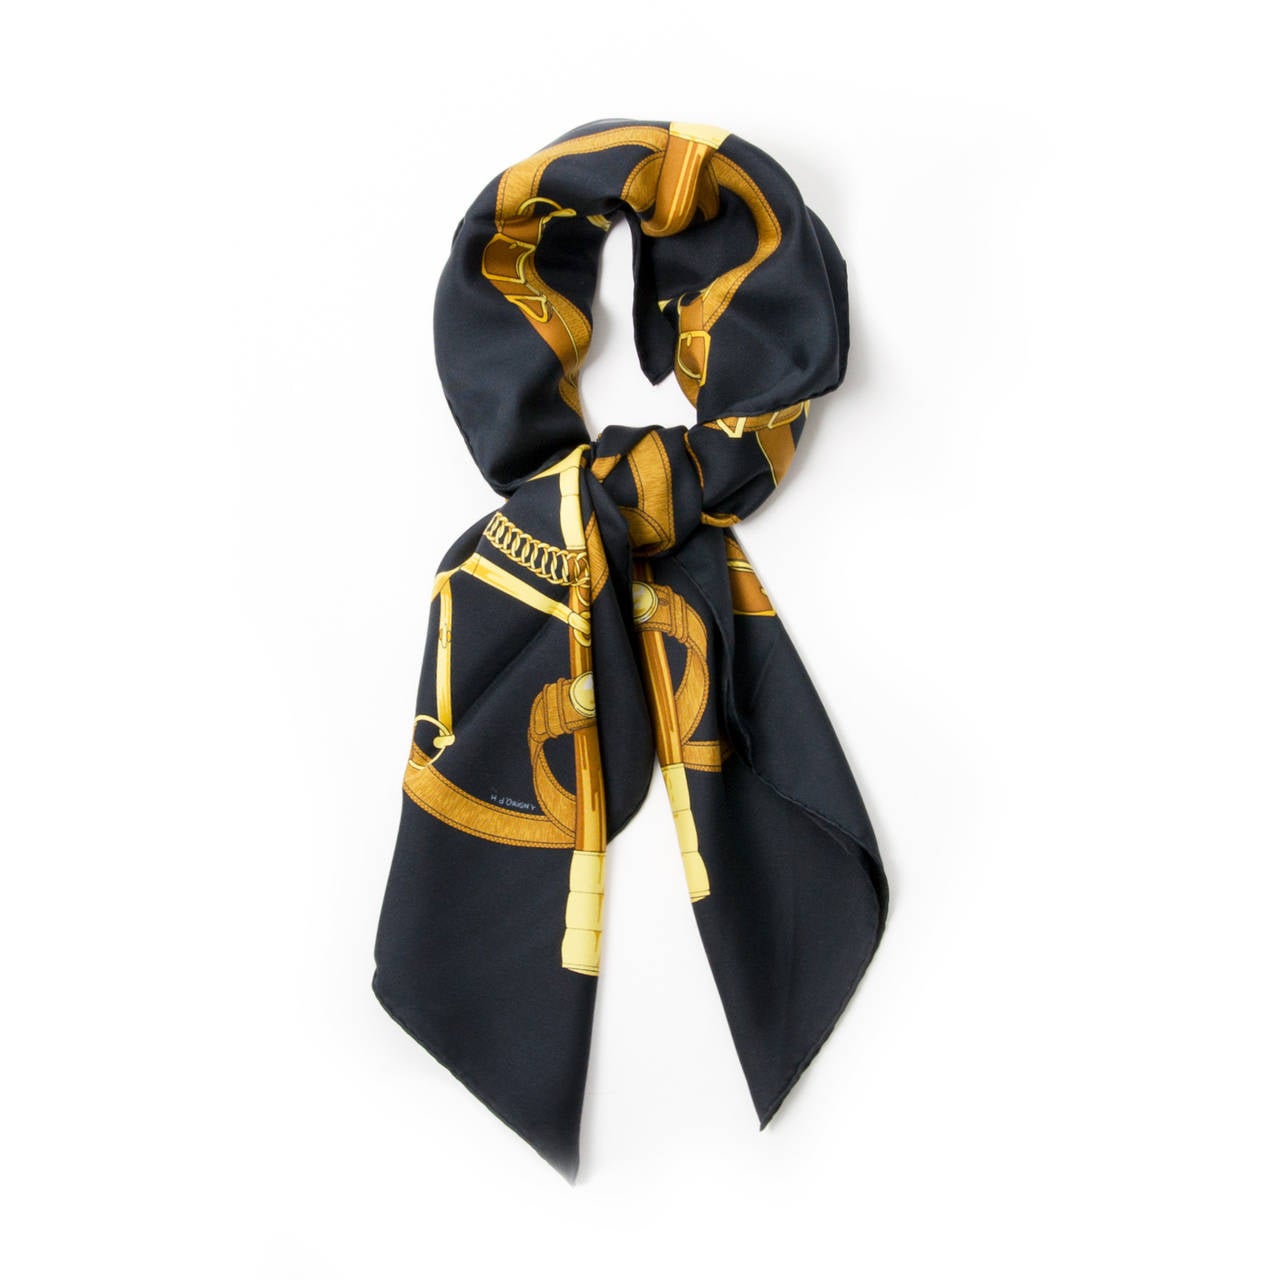 The well-known Hermès scarf or 